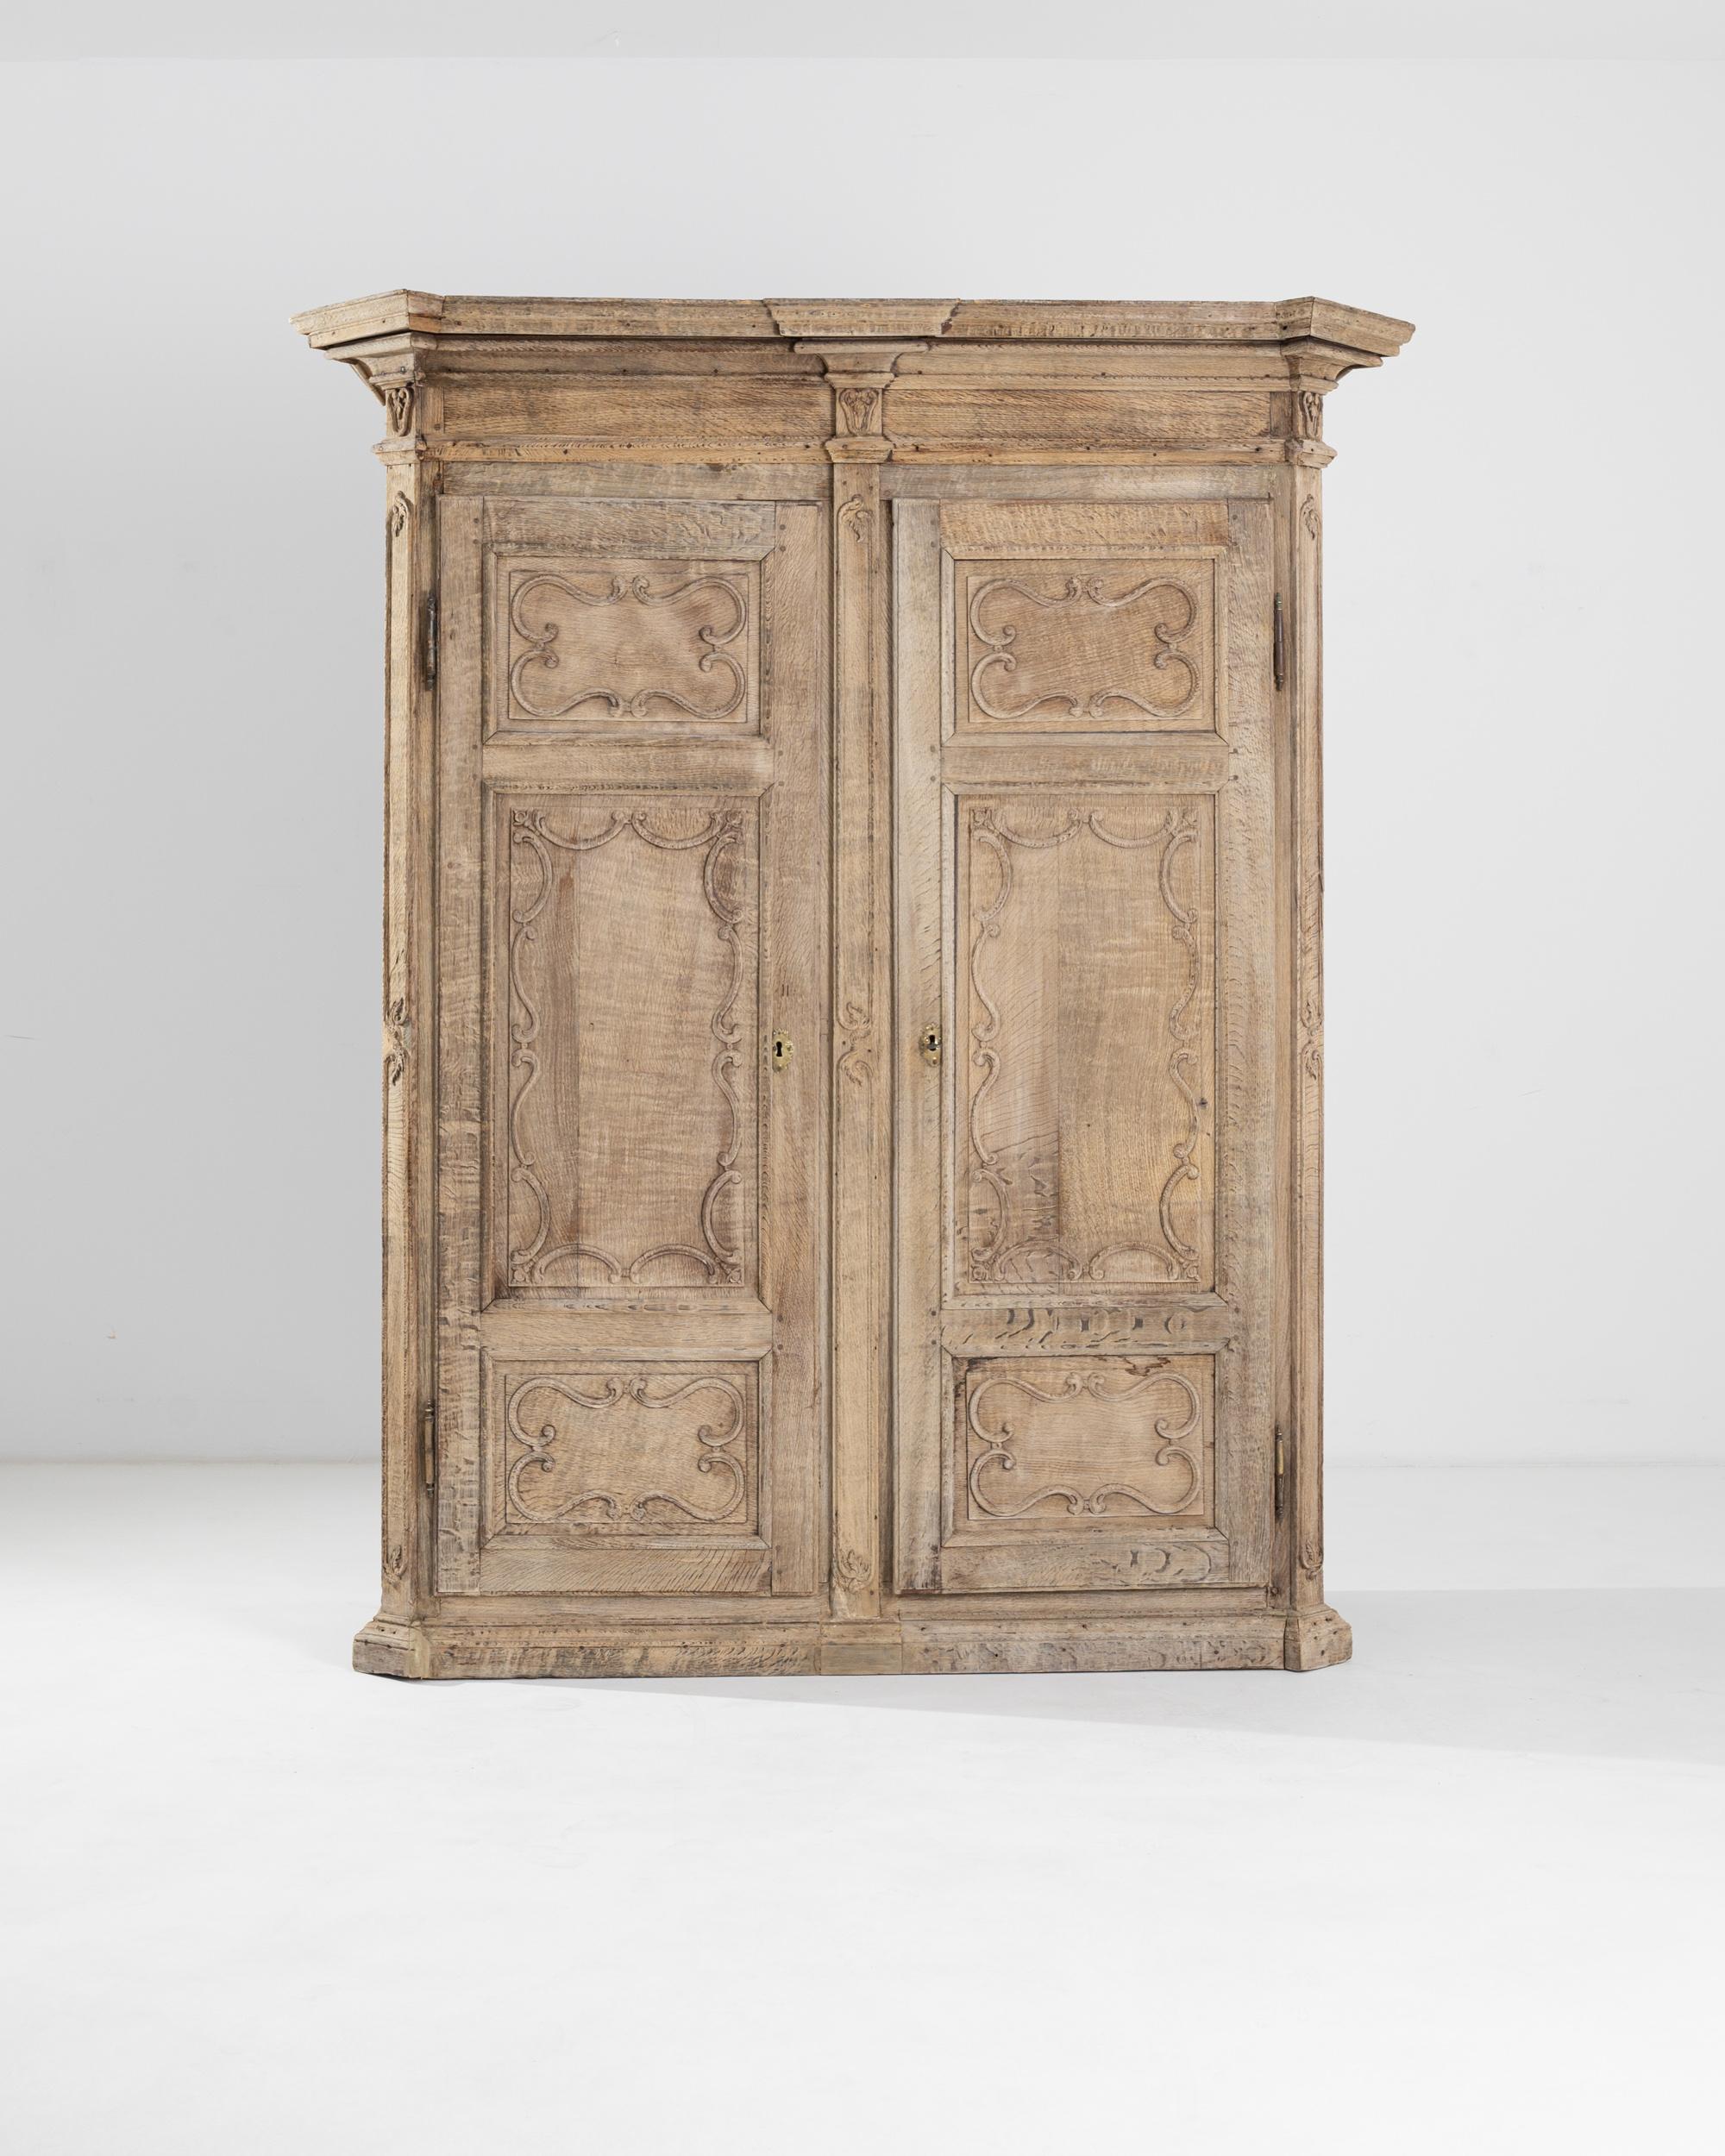 Crafted out of stout oak, this 19th-century French cabinet boasts a beautifully molded cornice with jutting corners crowning the top of the chest. Beveled elements and rectangular panels punctuate the flawless symmetry, smoothened by charming